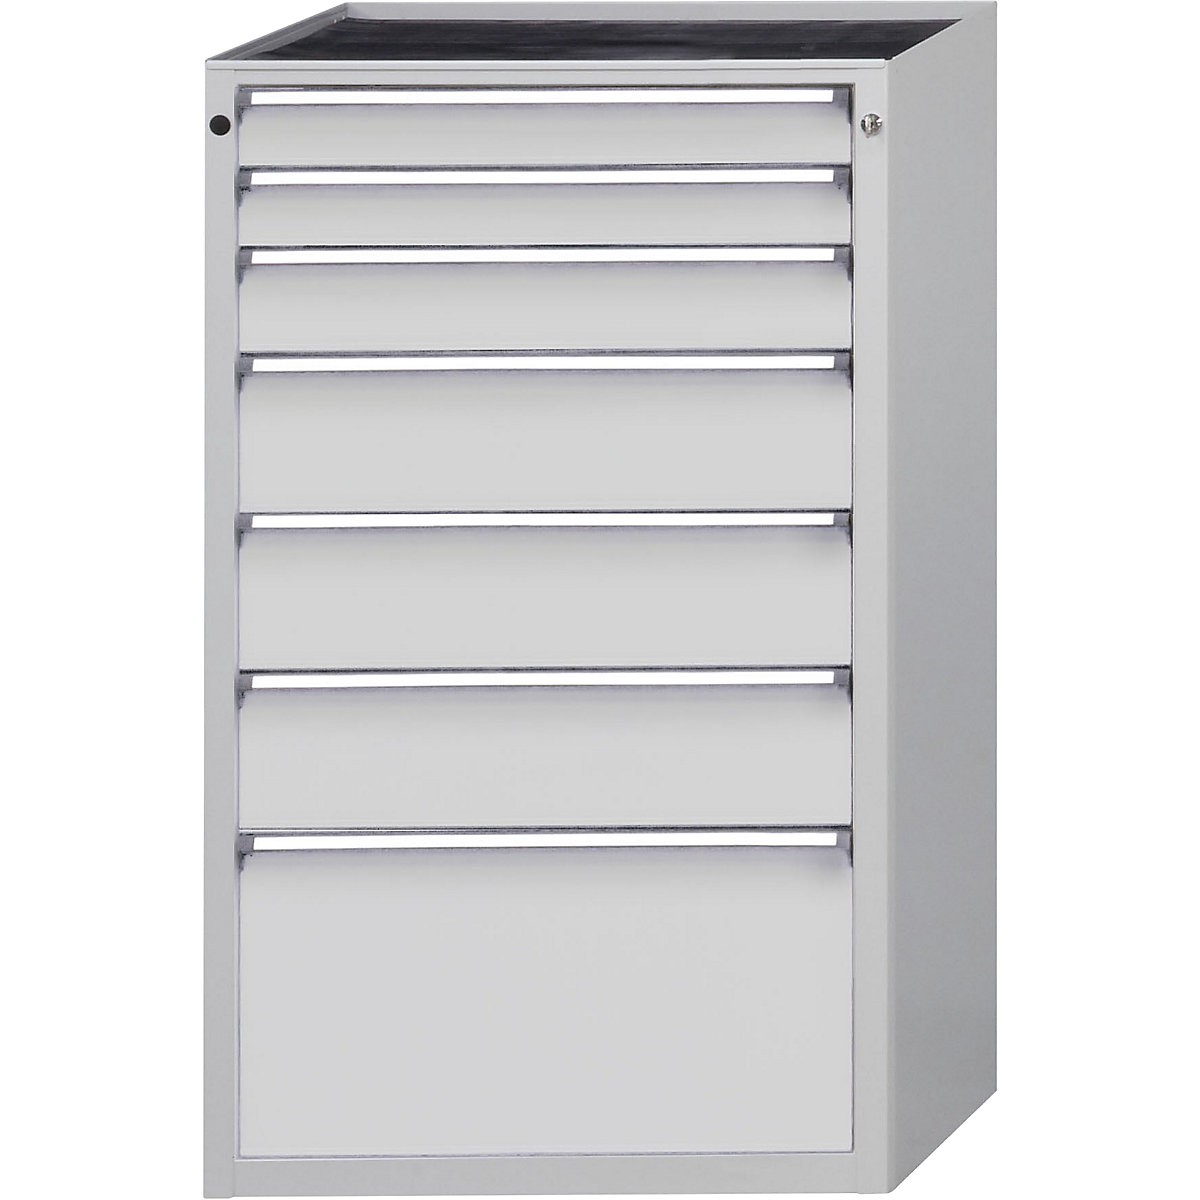 Drawer cupboard – ANKE, WxD 760 x 675 mm, 7 drawers, height 1280 mm, front in light grey-9